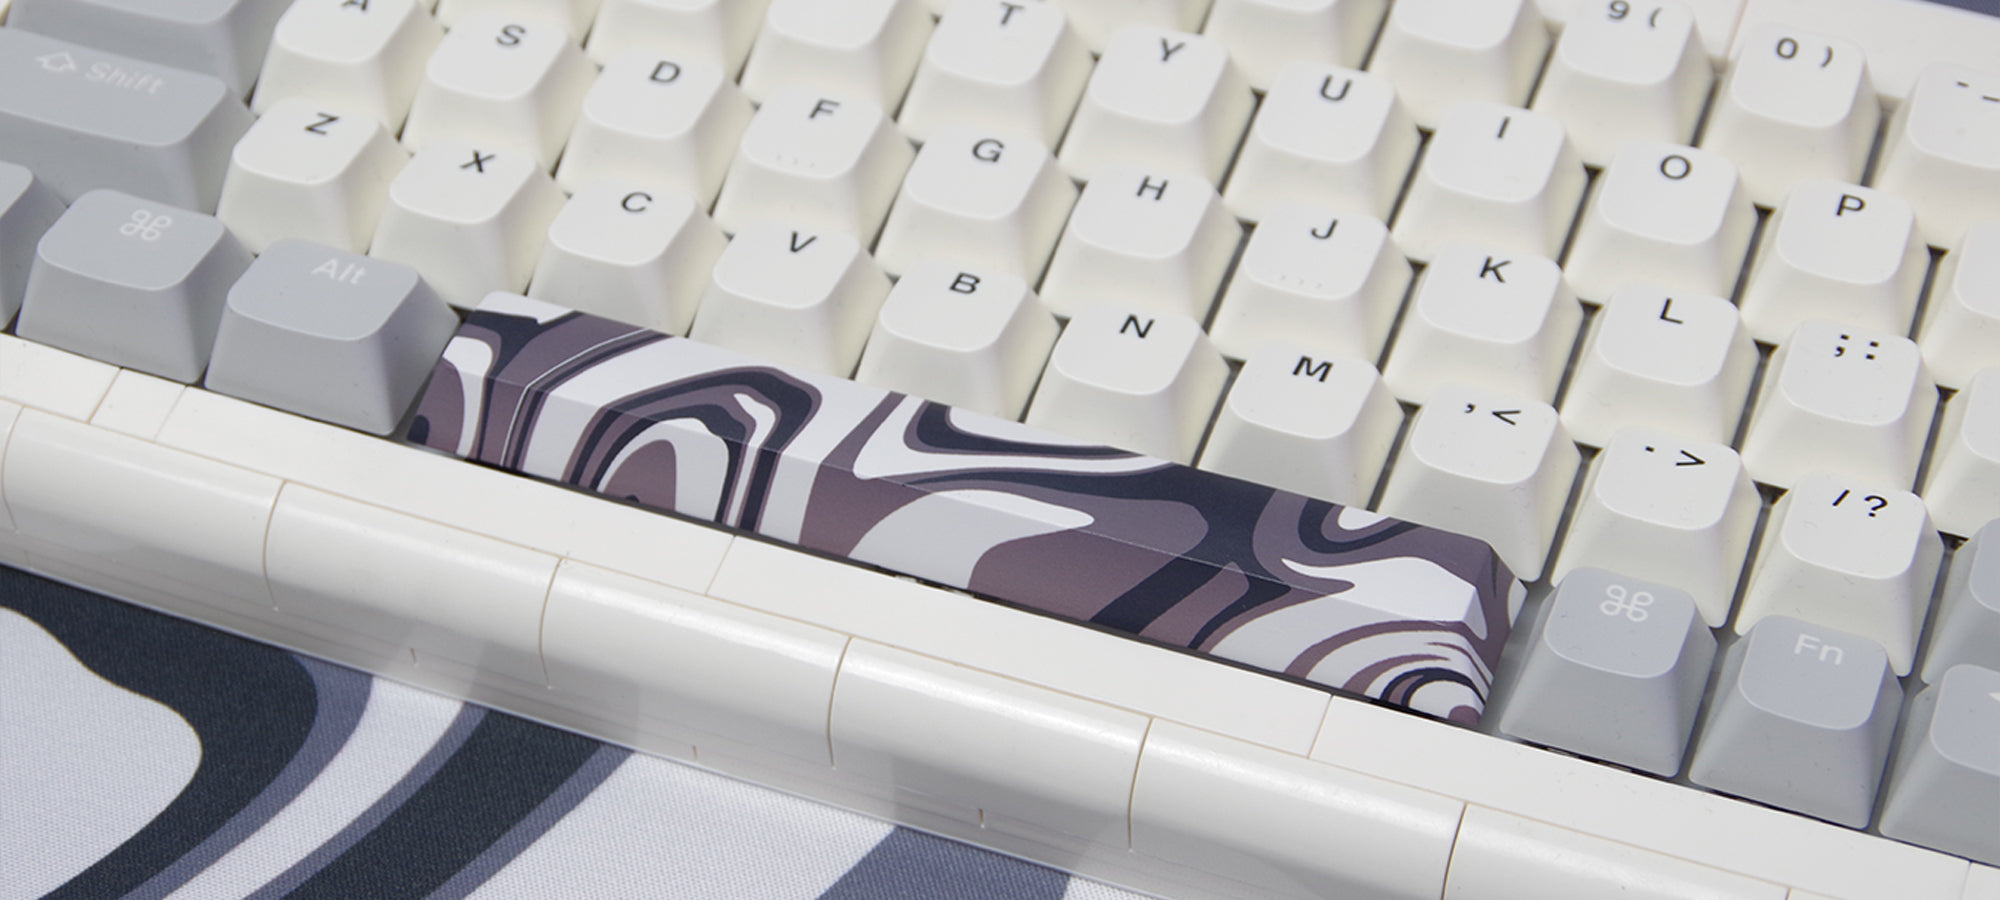 Black and White liquified spacebar